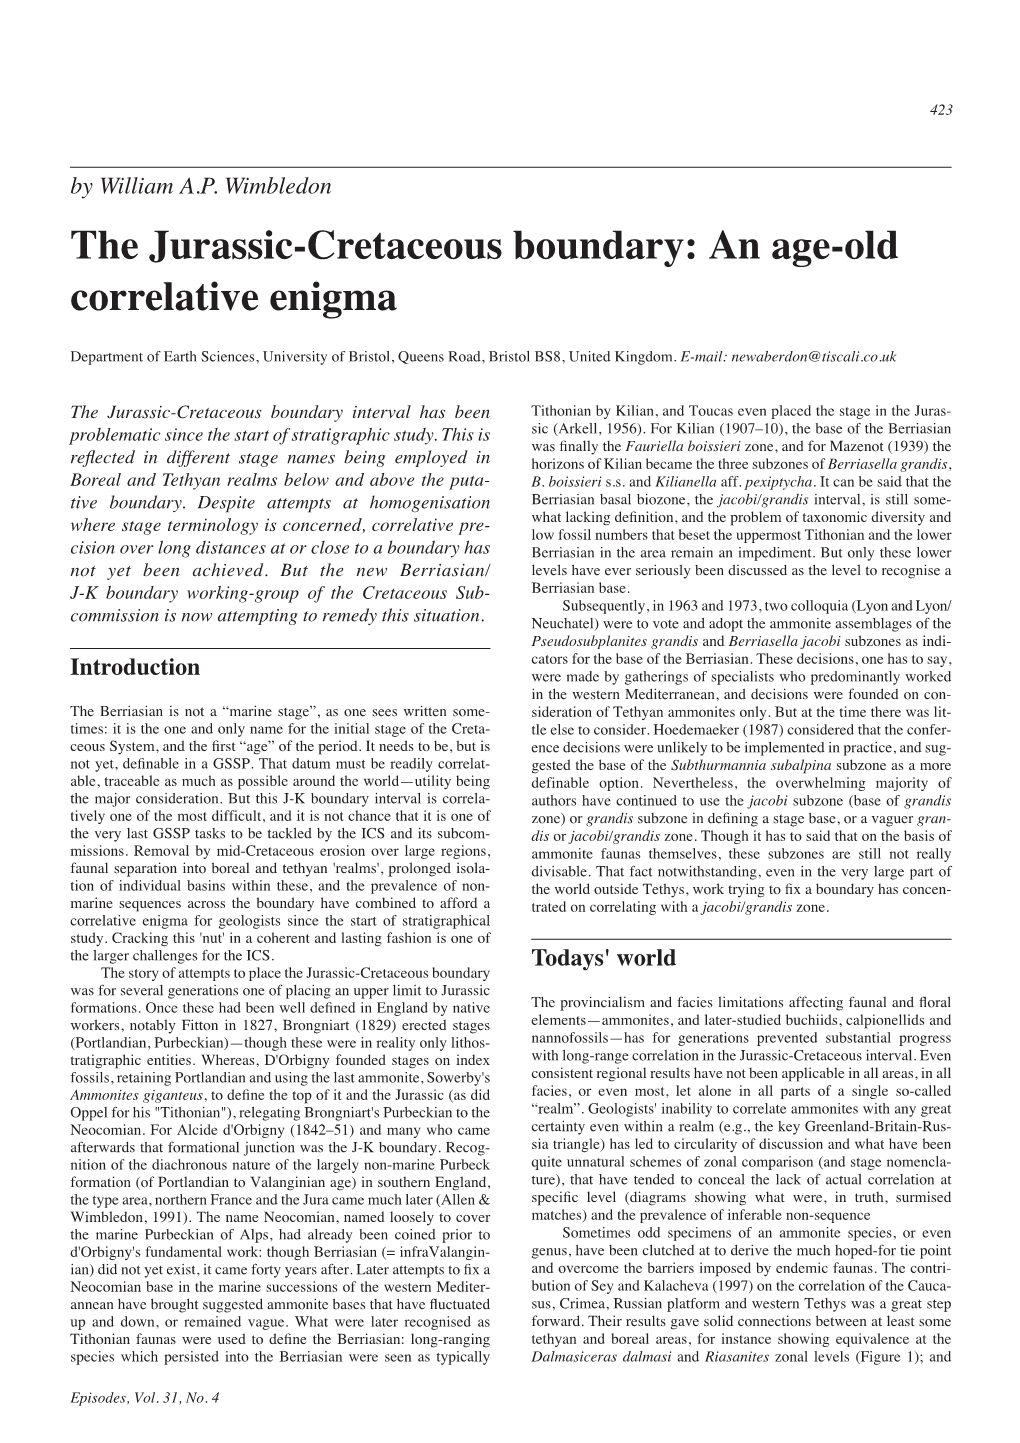 The Jurassic-Cretaceous Boundary: an Age-Old Correlative Enigma